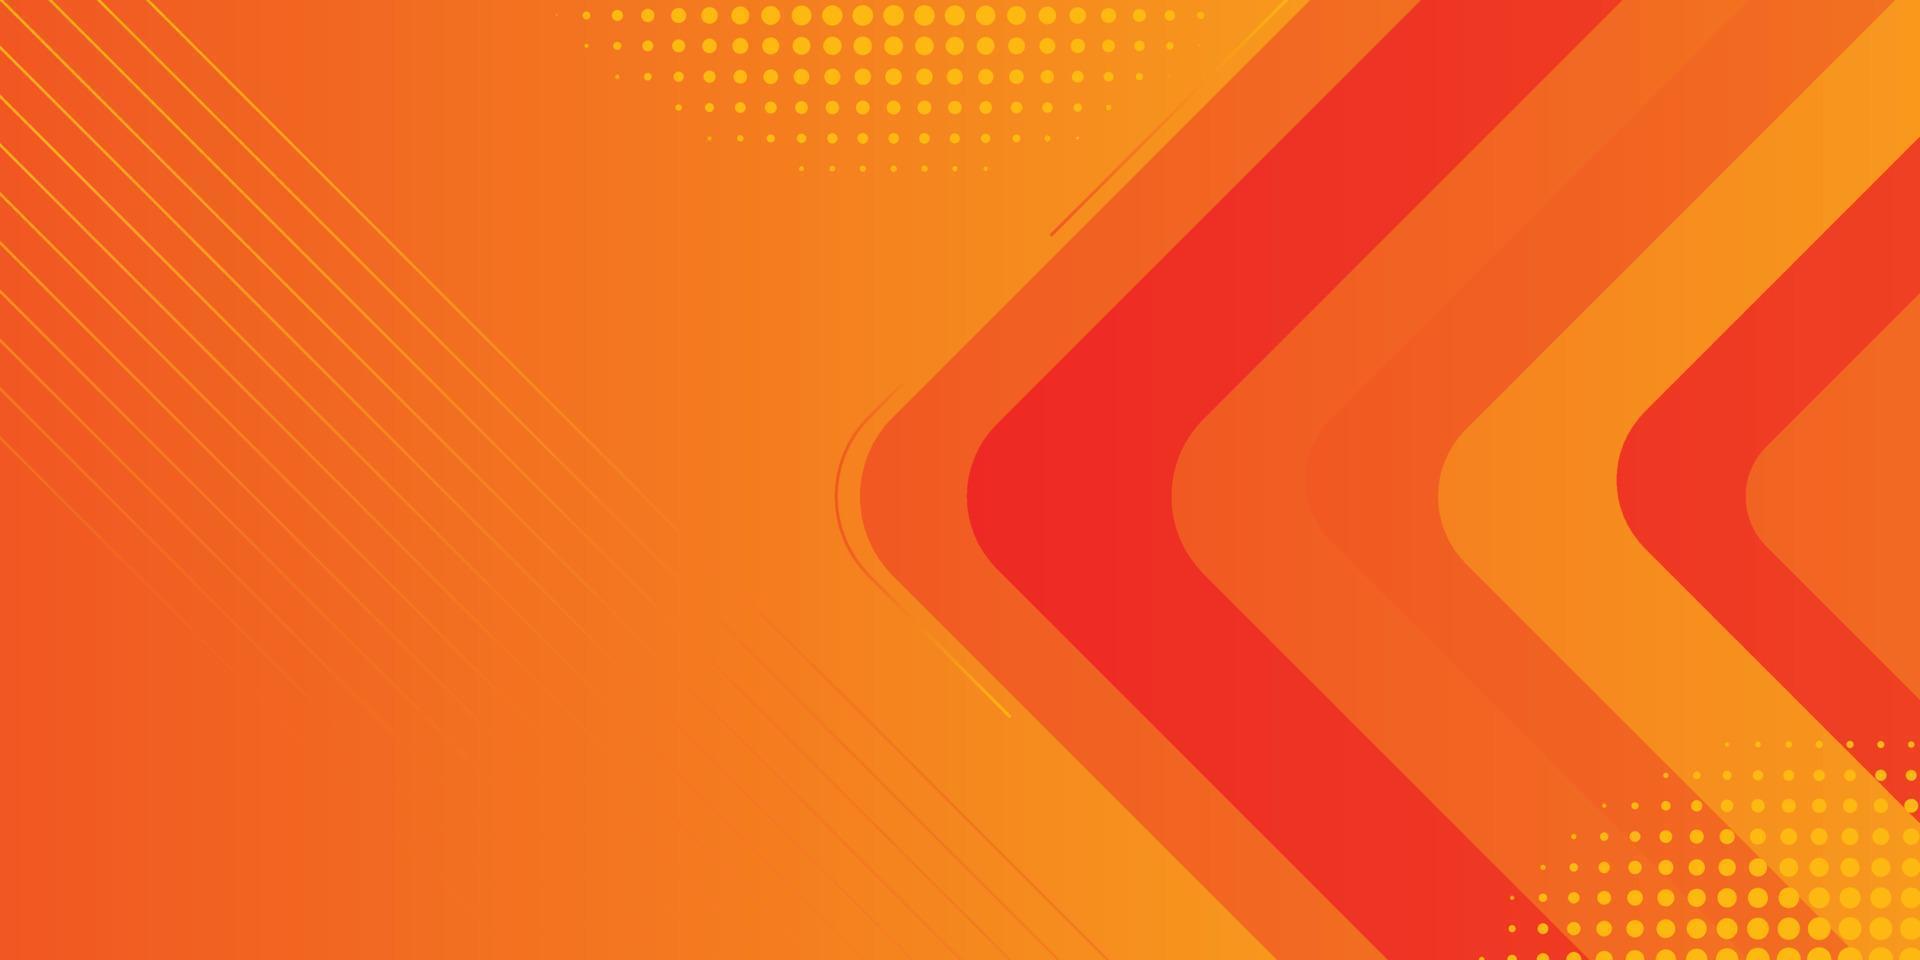 Orange abstract background, Modern orange background used for business, corporate, institution, poster, template, party, festive, seminar, orange dynamic gradient background, vector, illustration vector